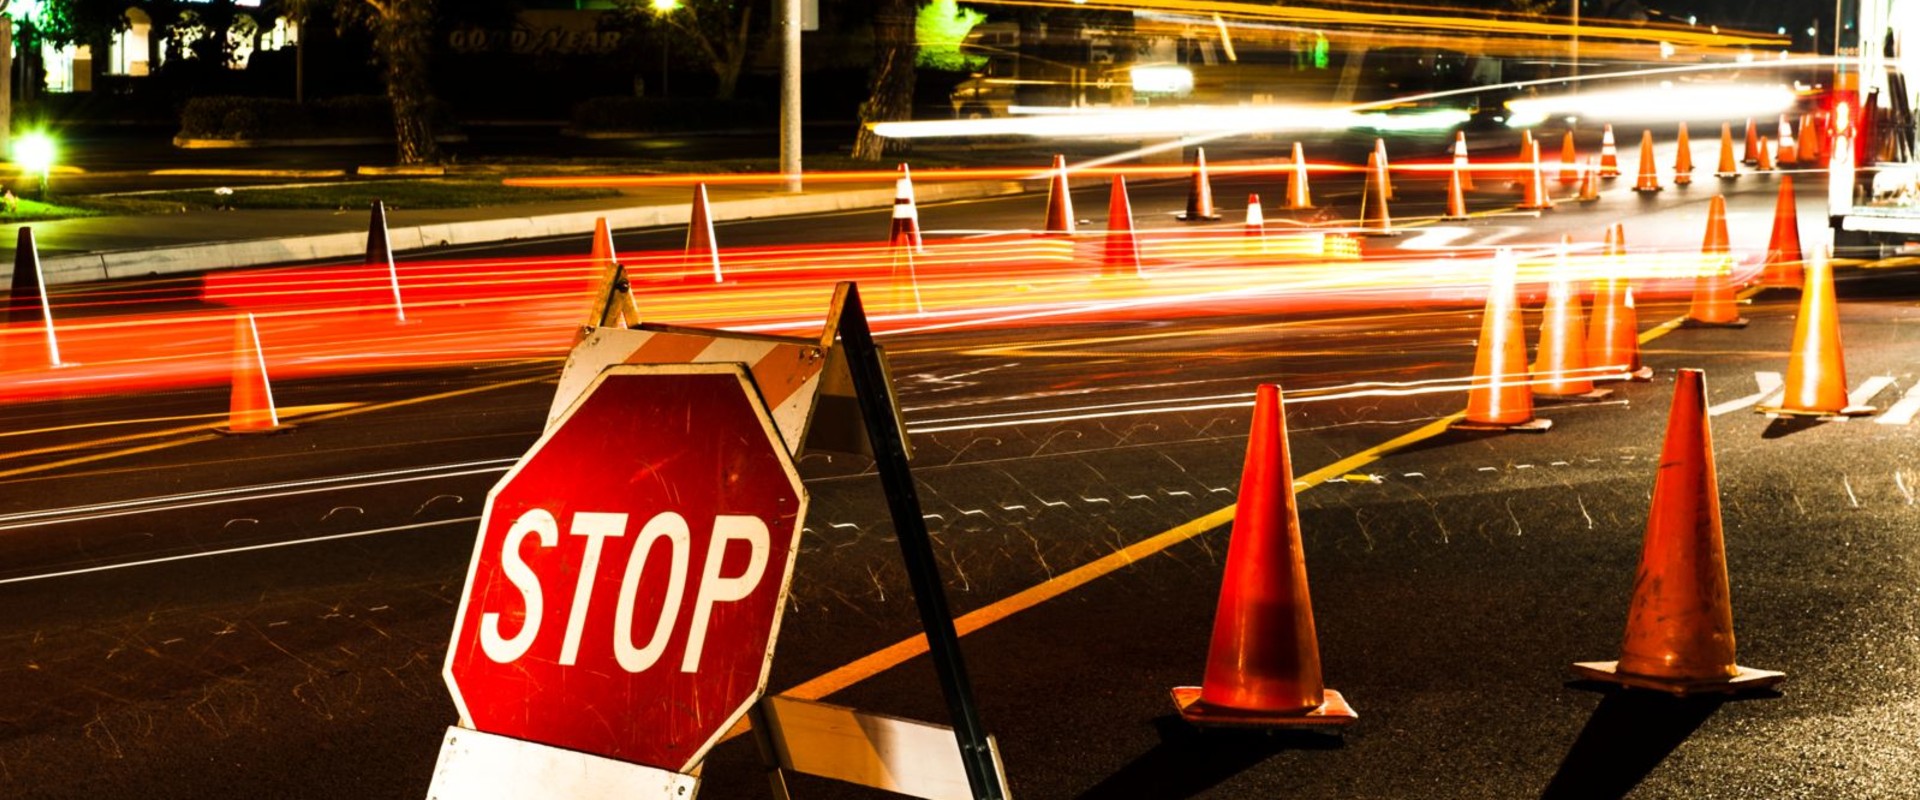 Are dui stops illegal?